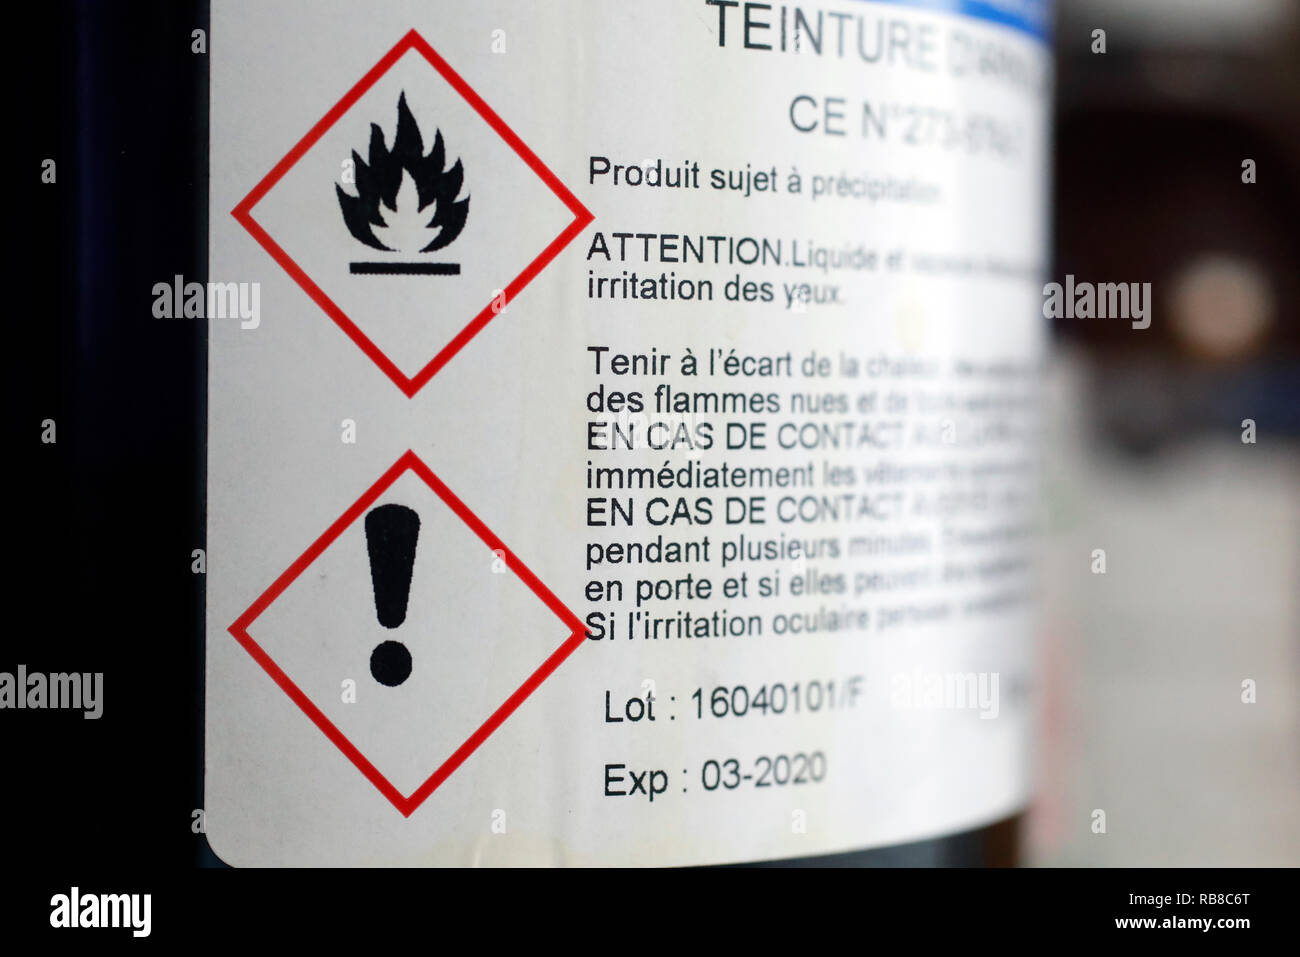 Pharmacy. A warning label on the side of a bottle. France. Stock Photo